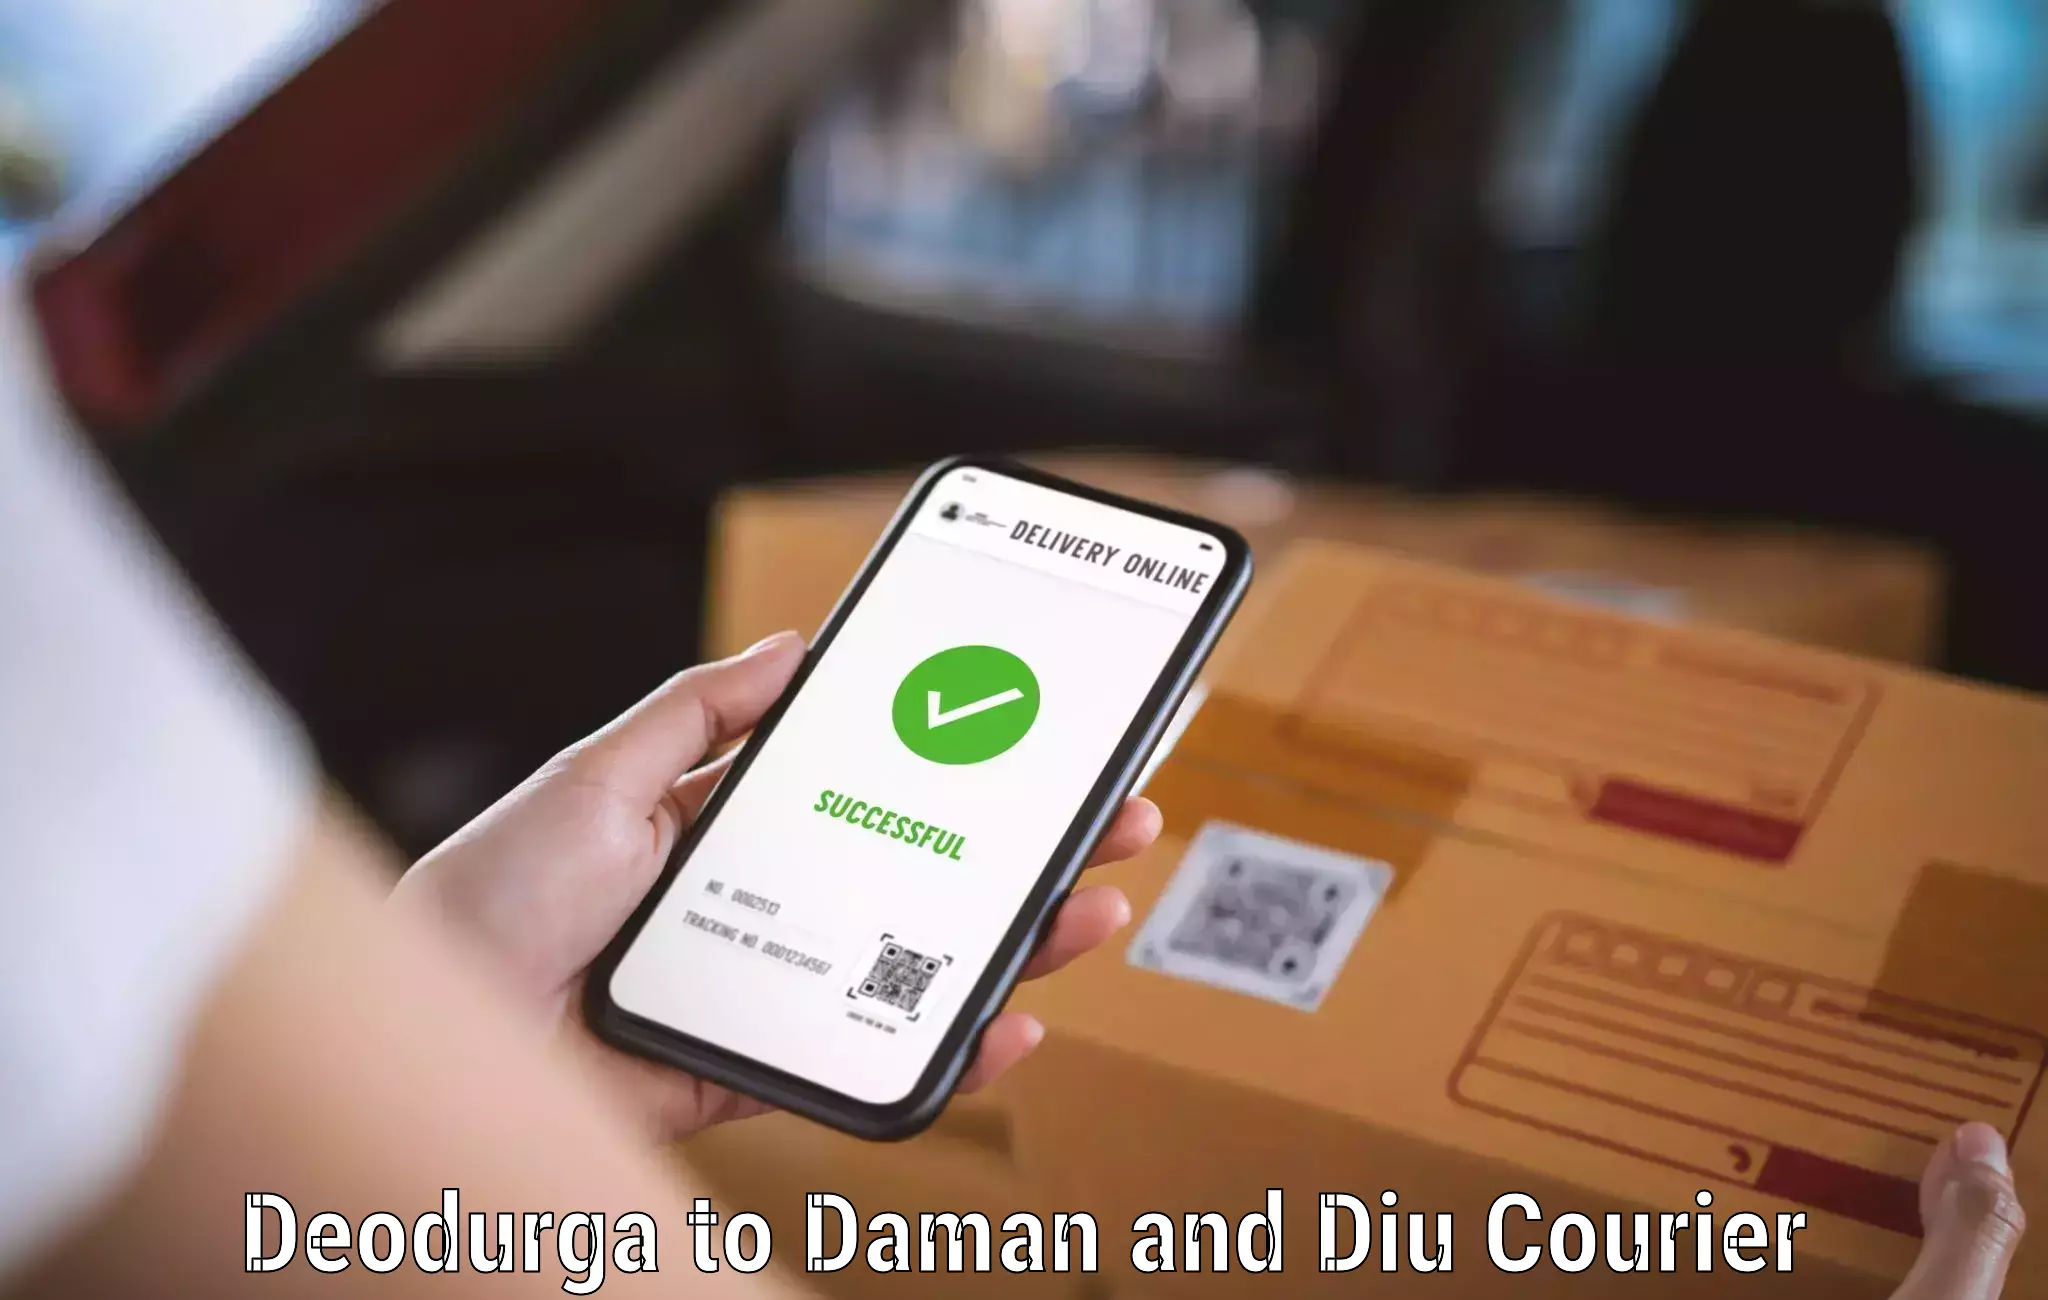 Express package delivery Deodurga to Daman